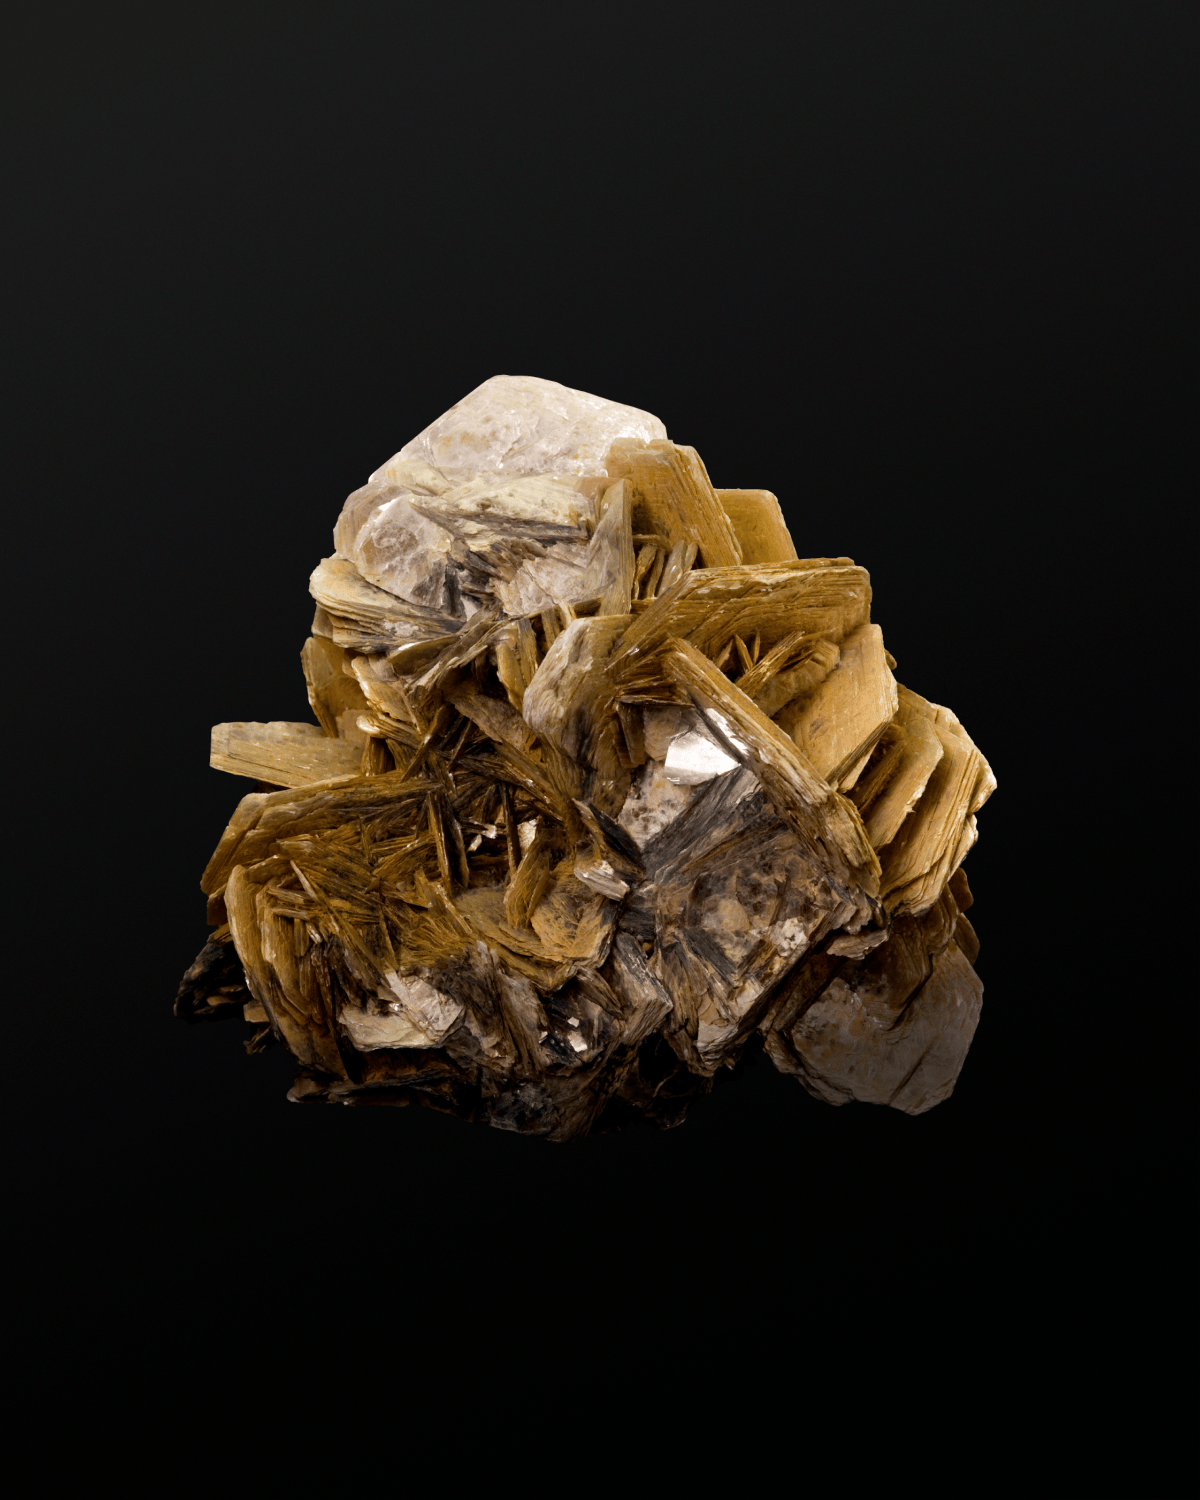 Mica material, flaky and golden, black background